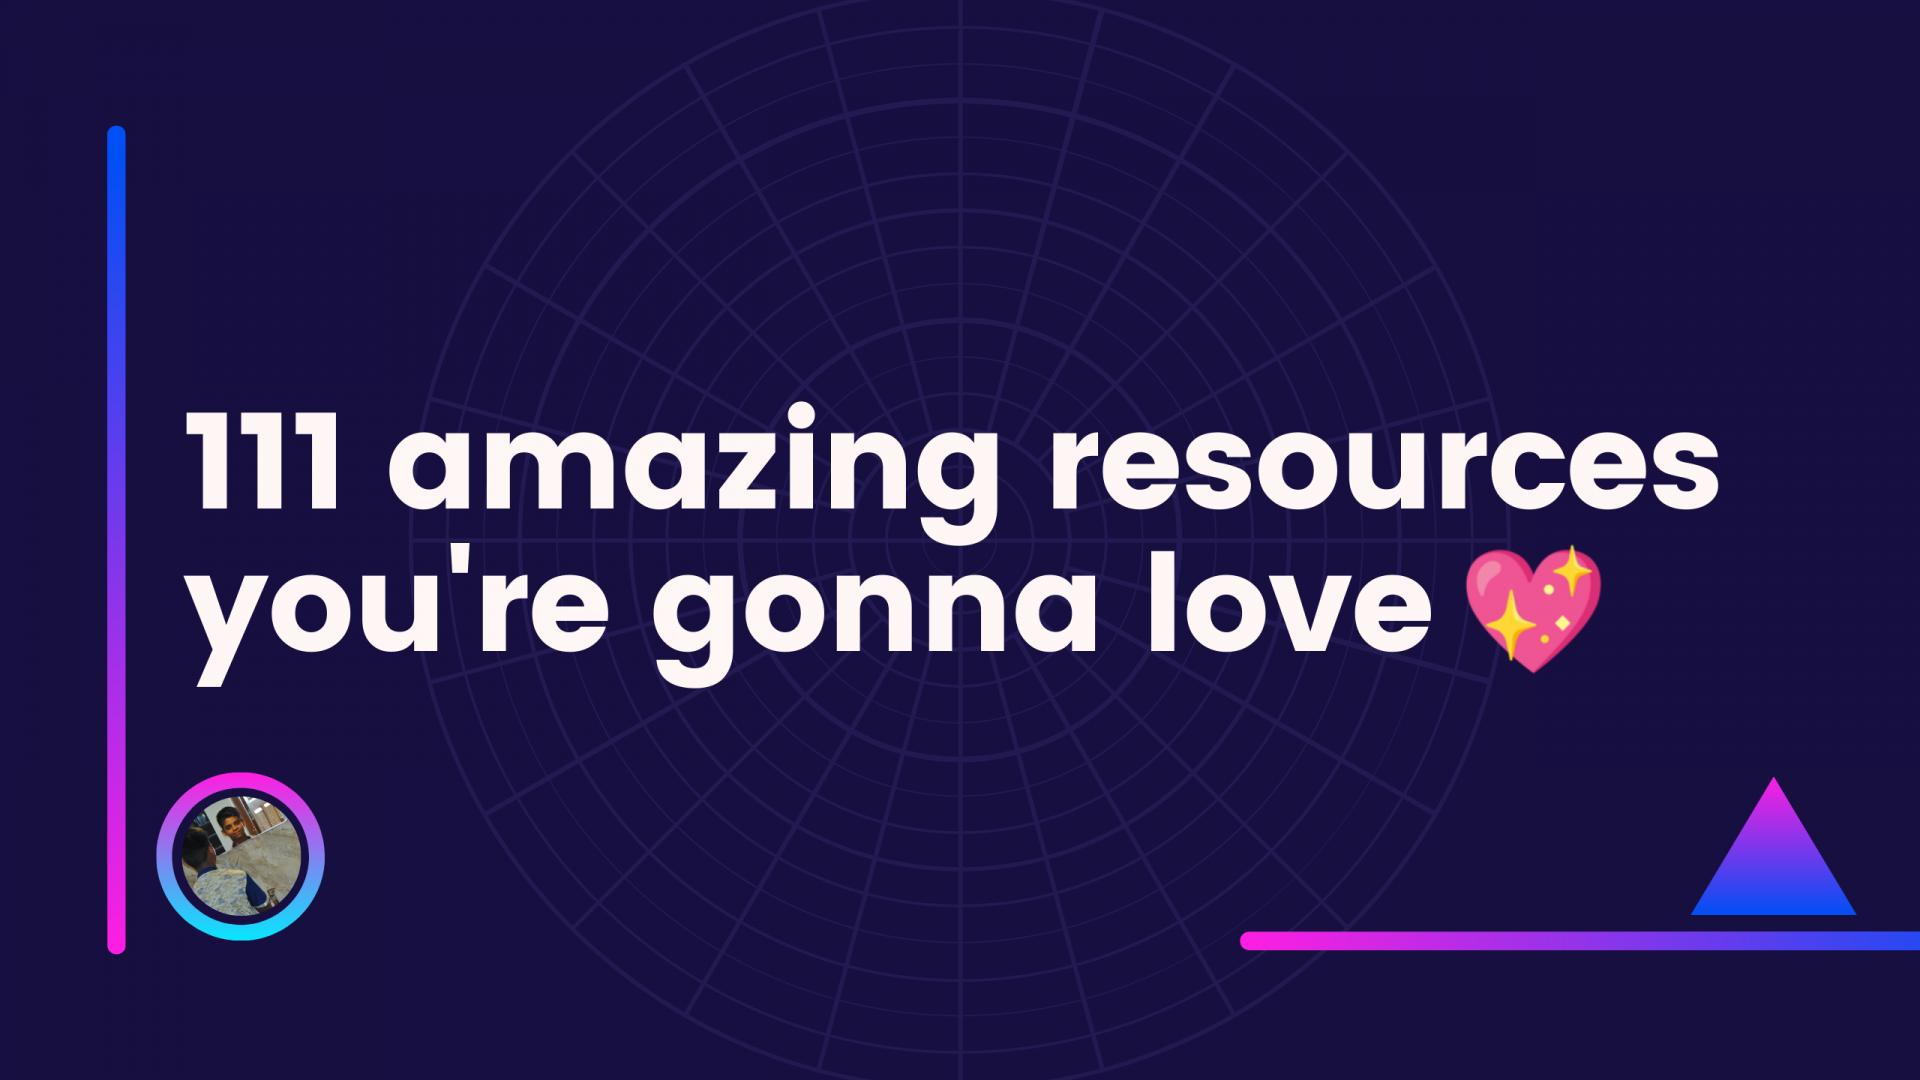 111 amazing resources you're gonna love 💖